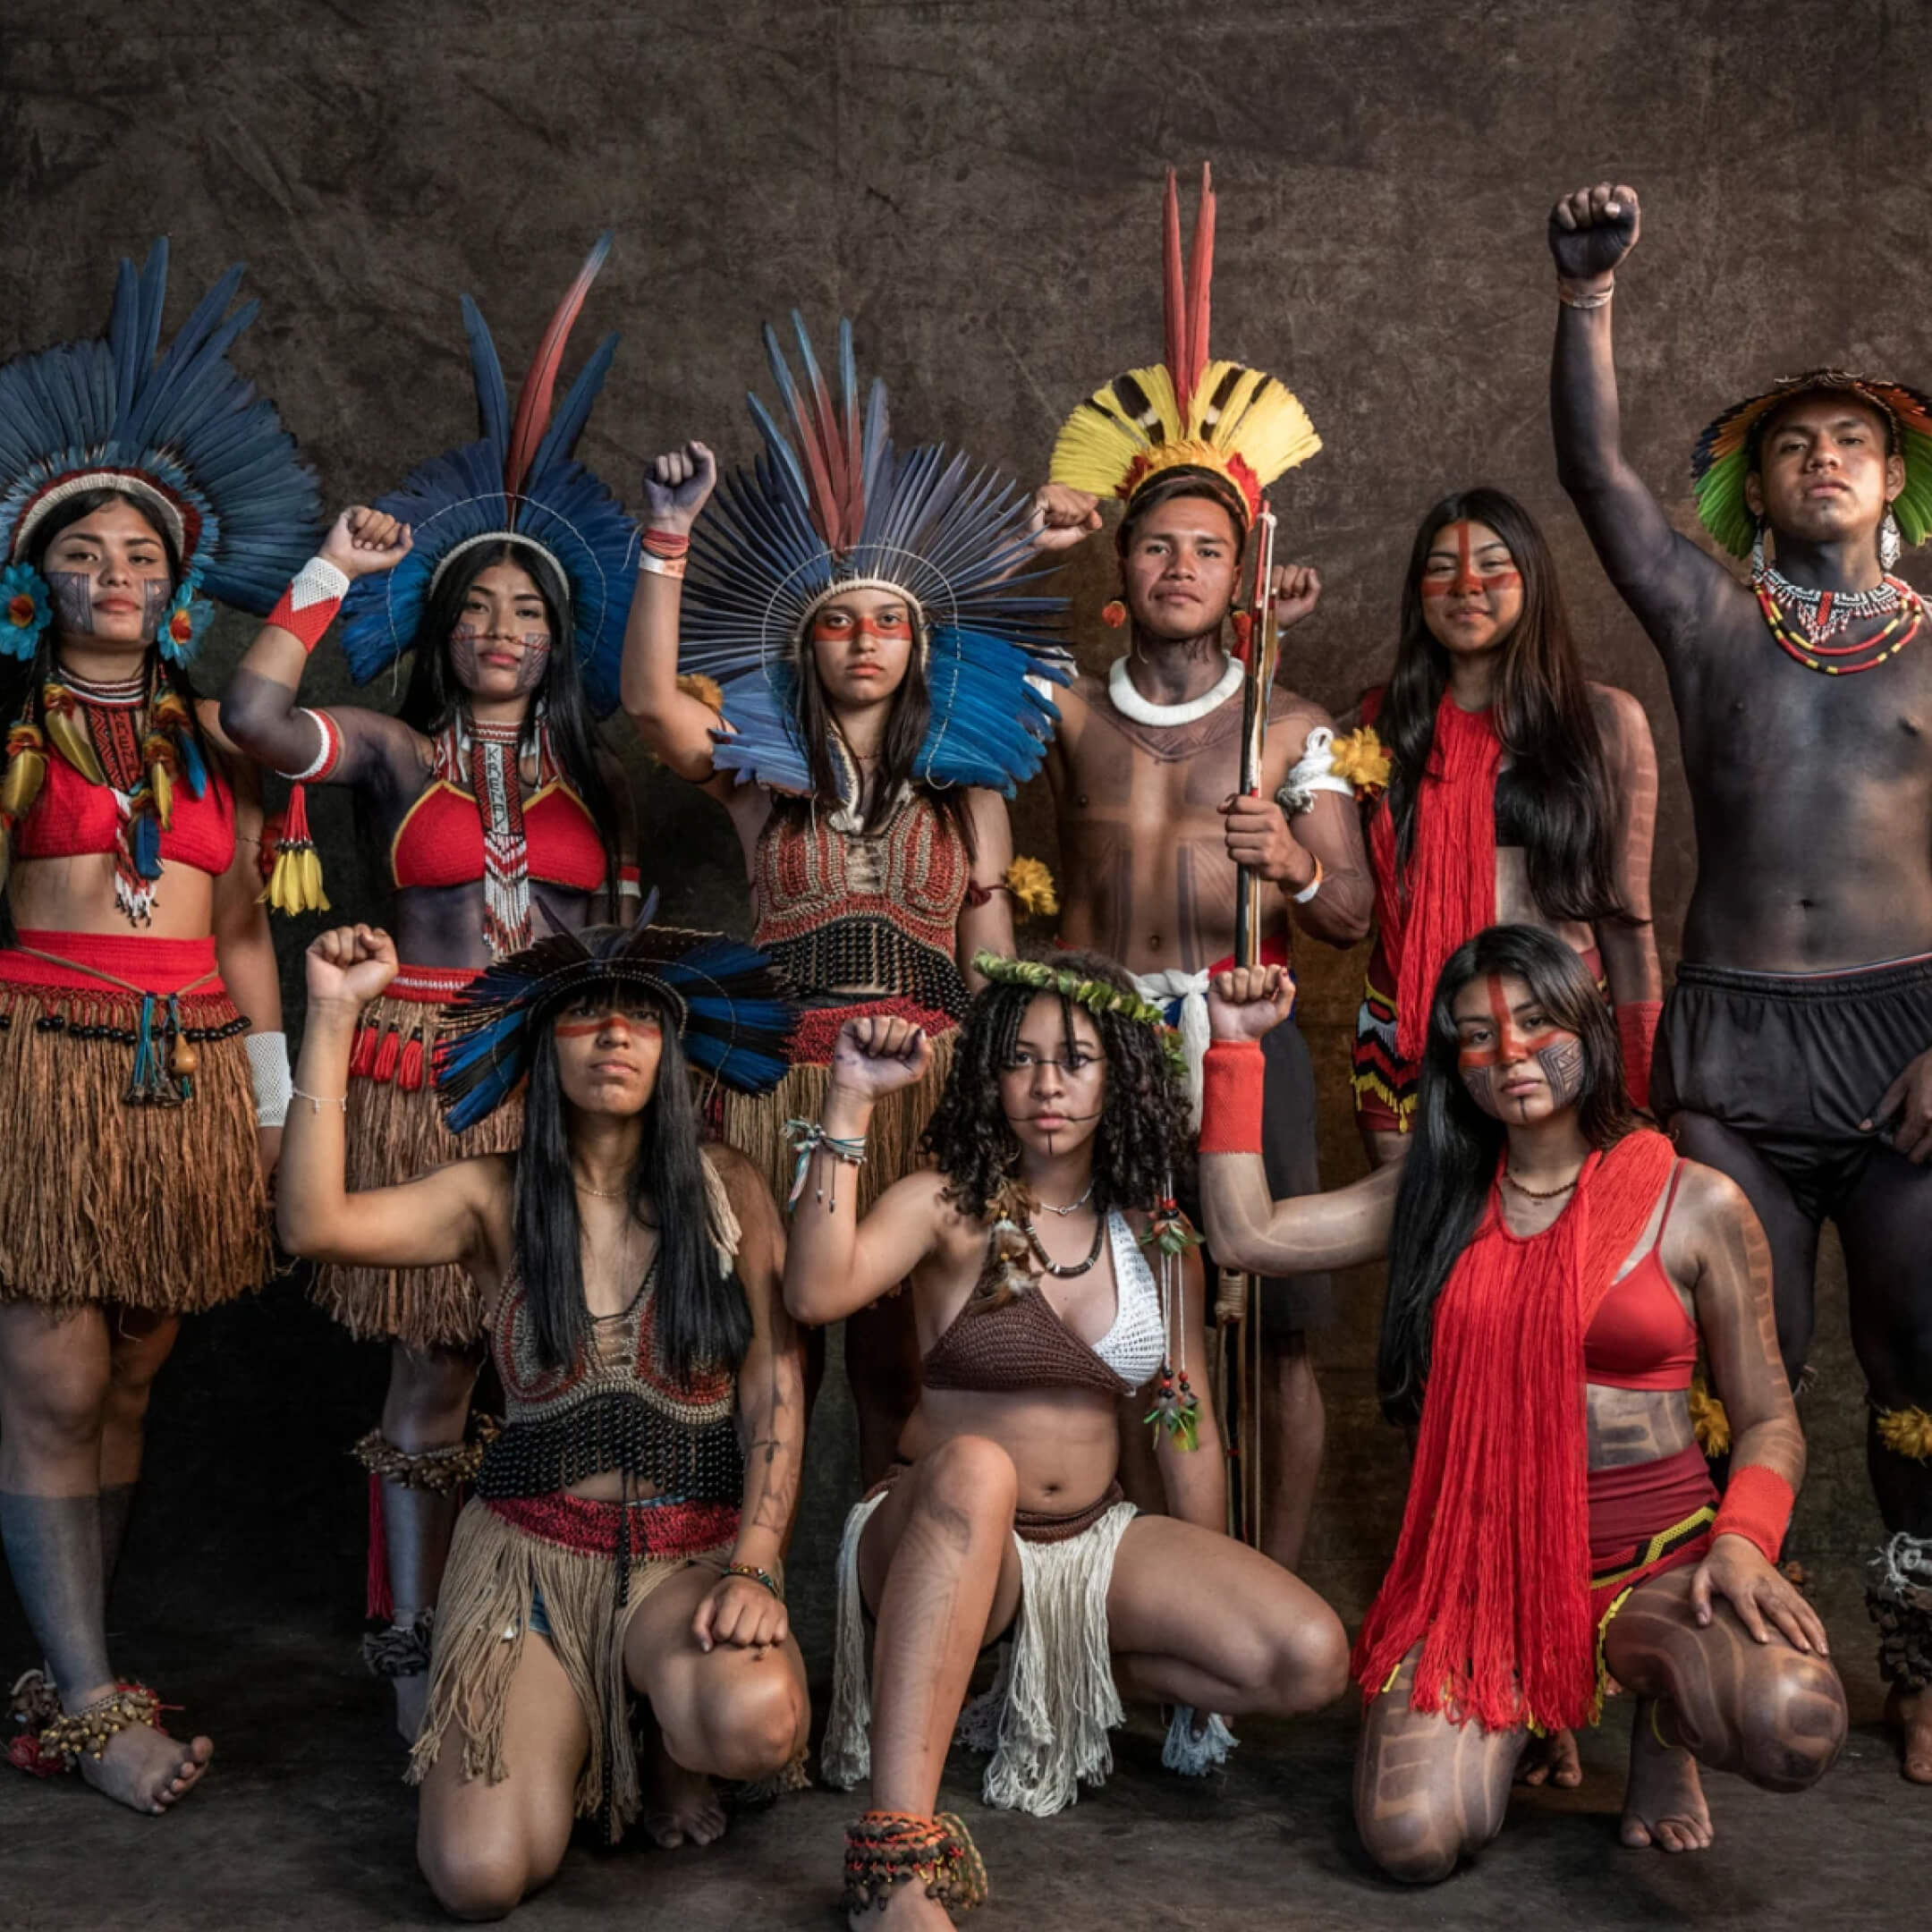 The O futuro é indígena (the Future is Indigenous) project serves to remind people about the critical importance of indigenous communities across Brazil